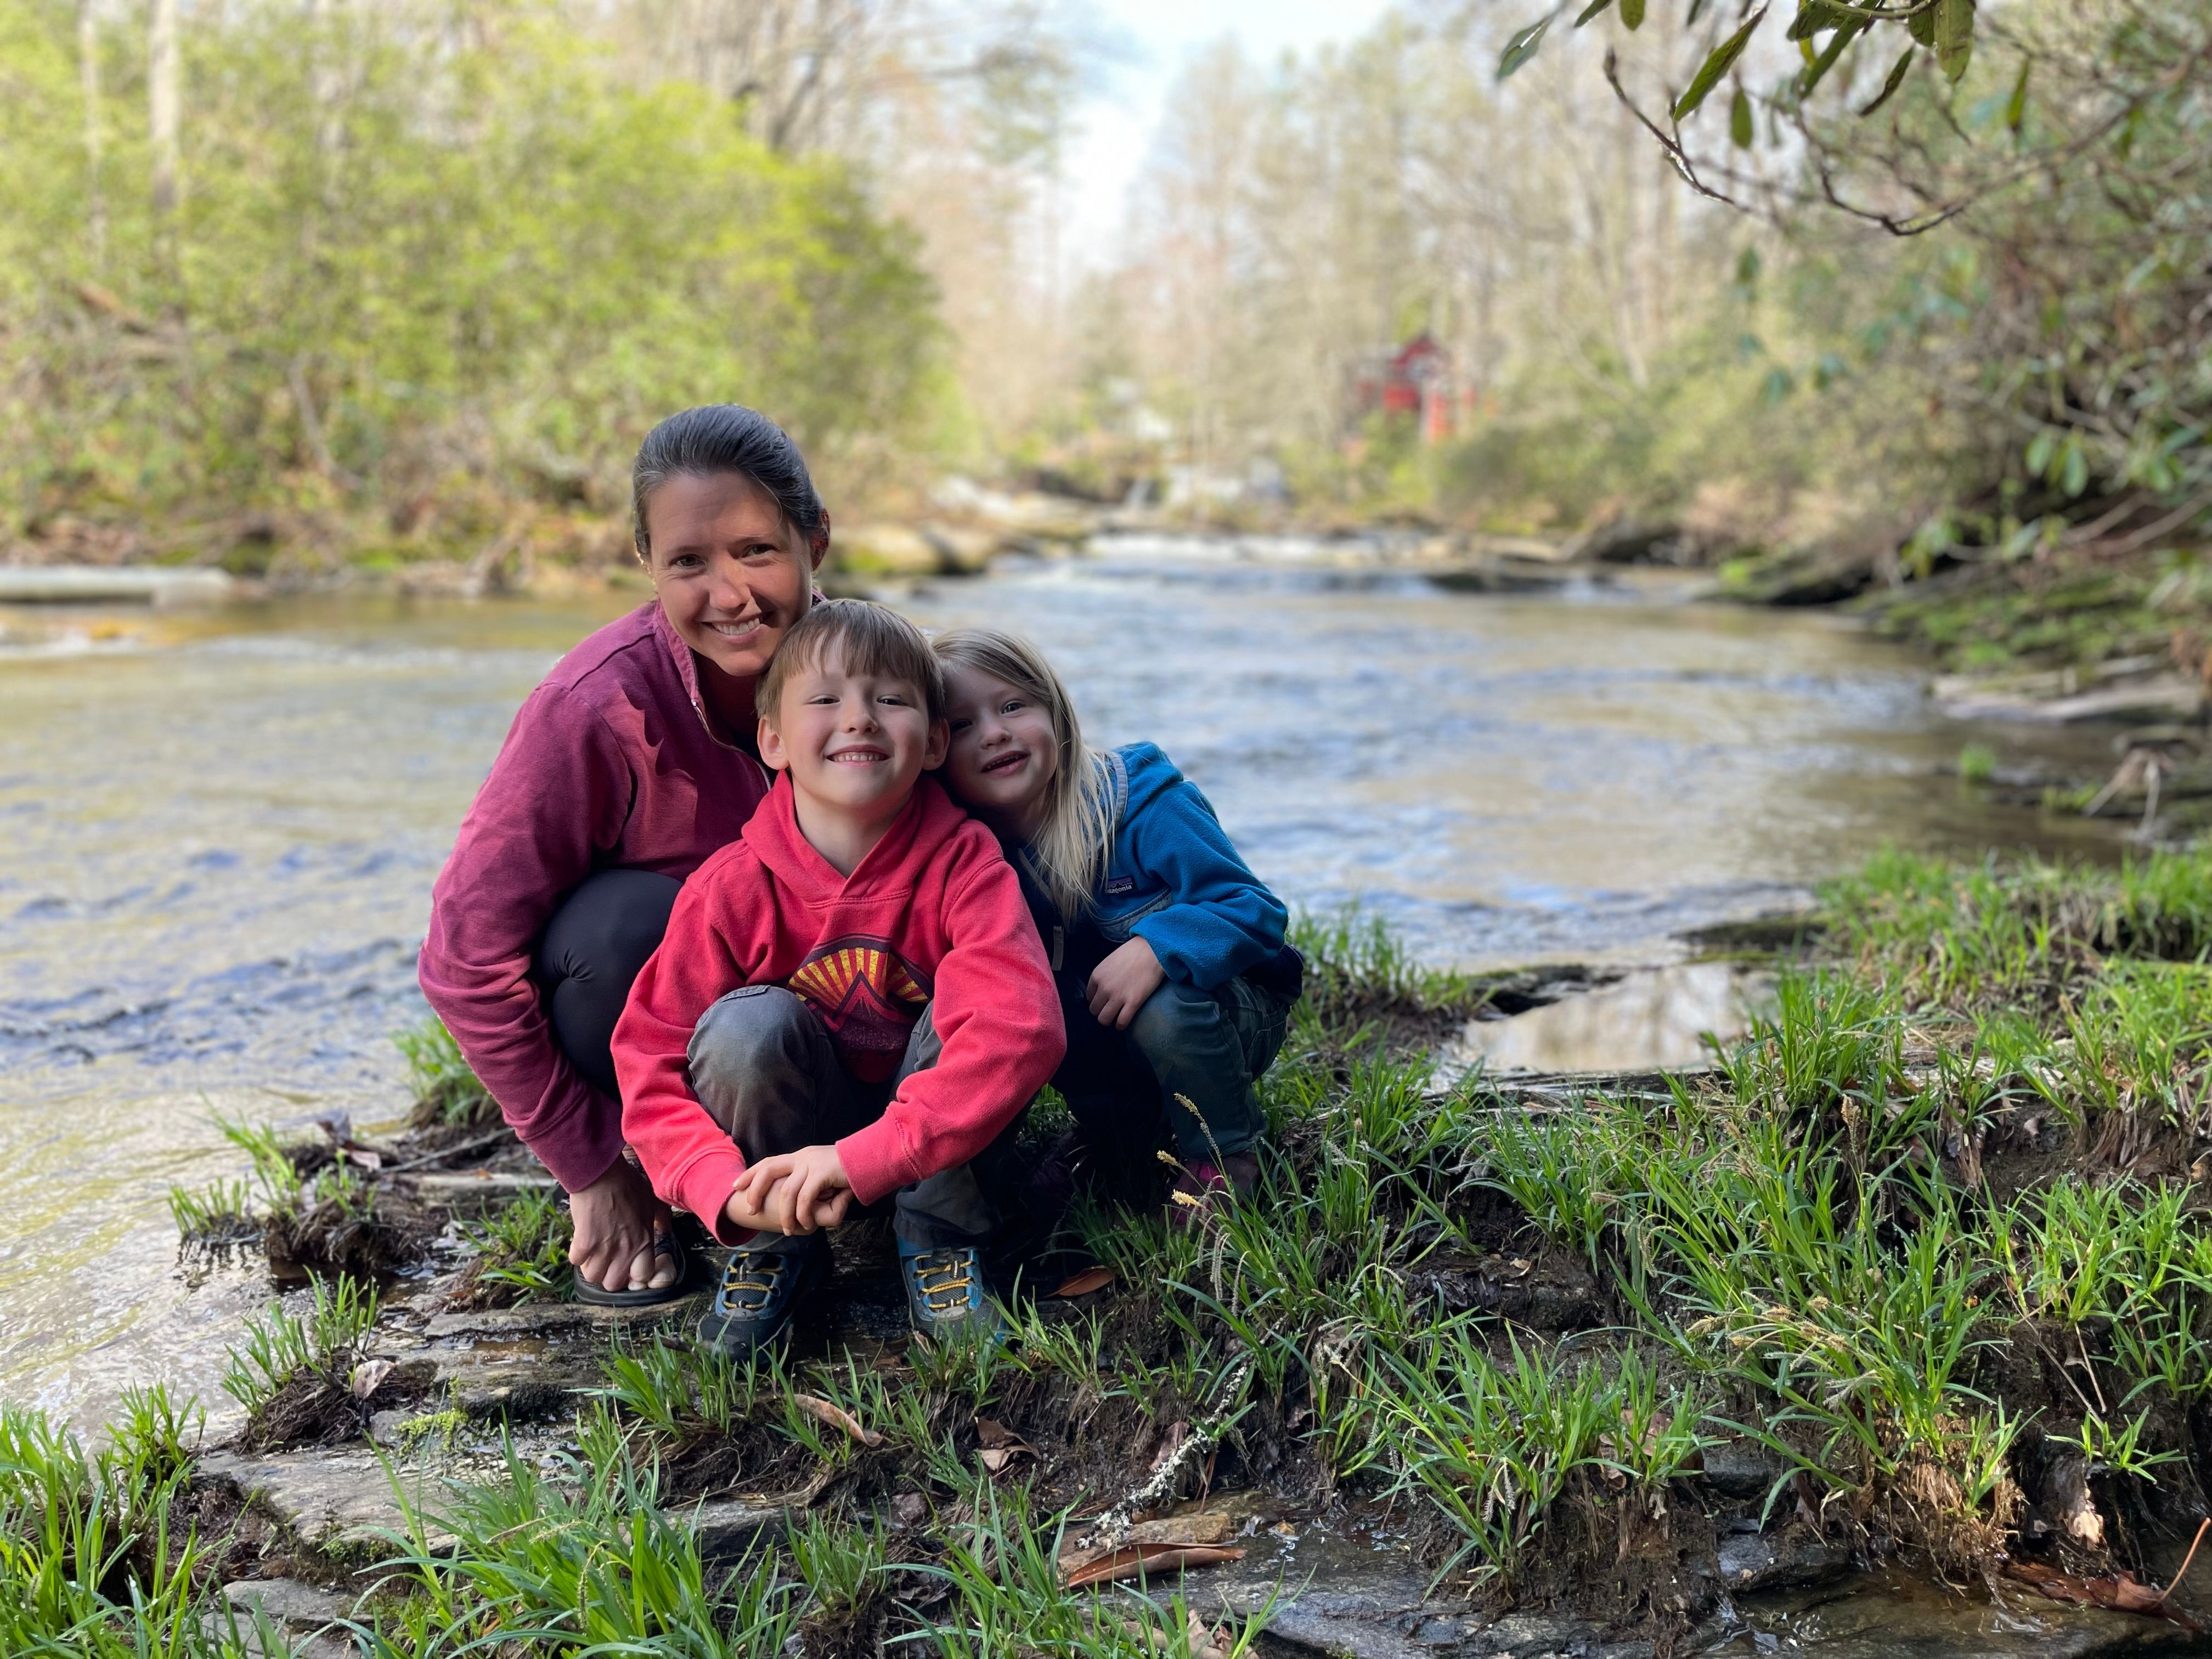 My wife and children by the river